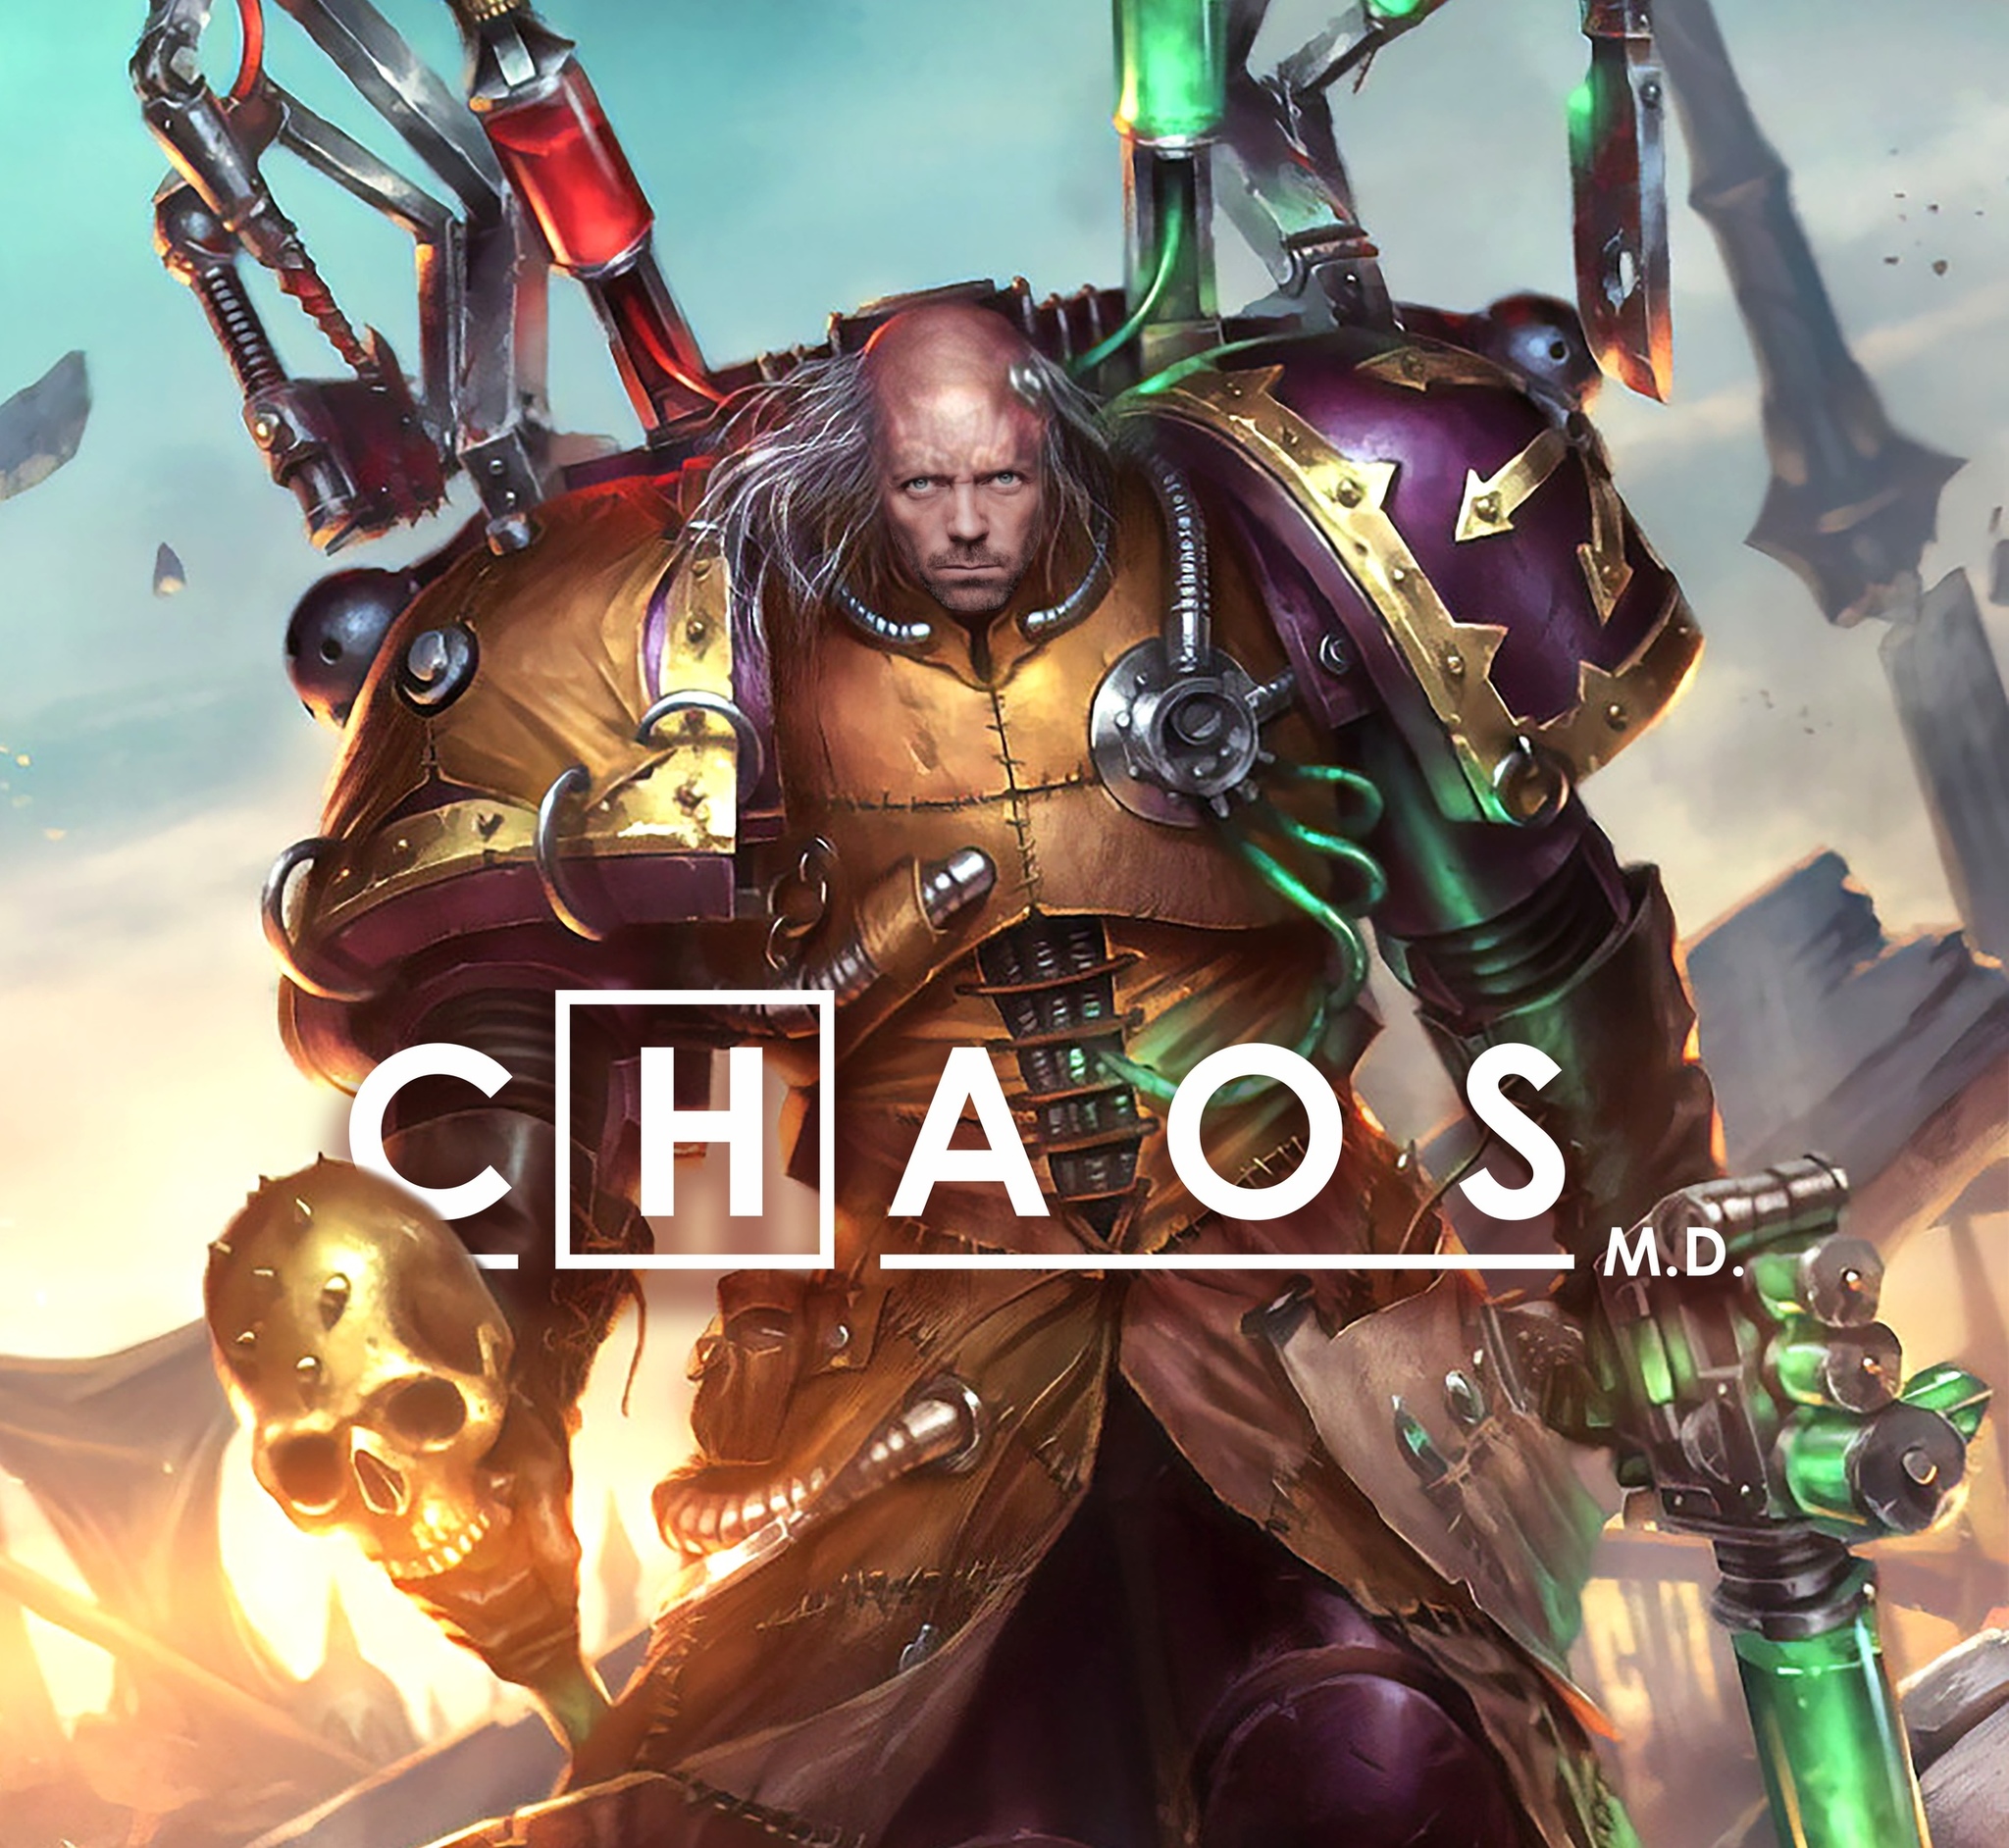 Chaos M.D - Warhammer, Chaos, Warhammer 40k, Dr. House, Wh humor